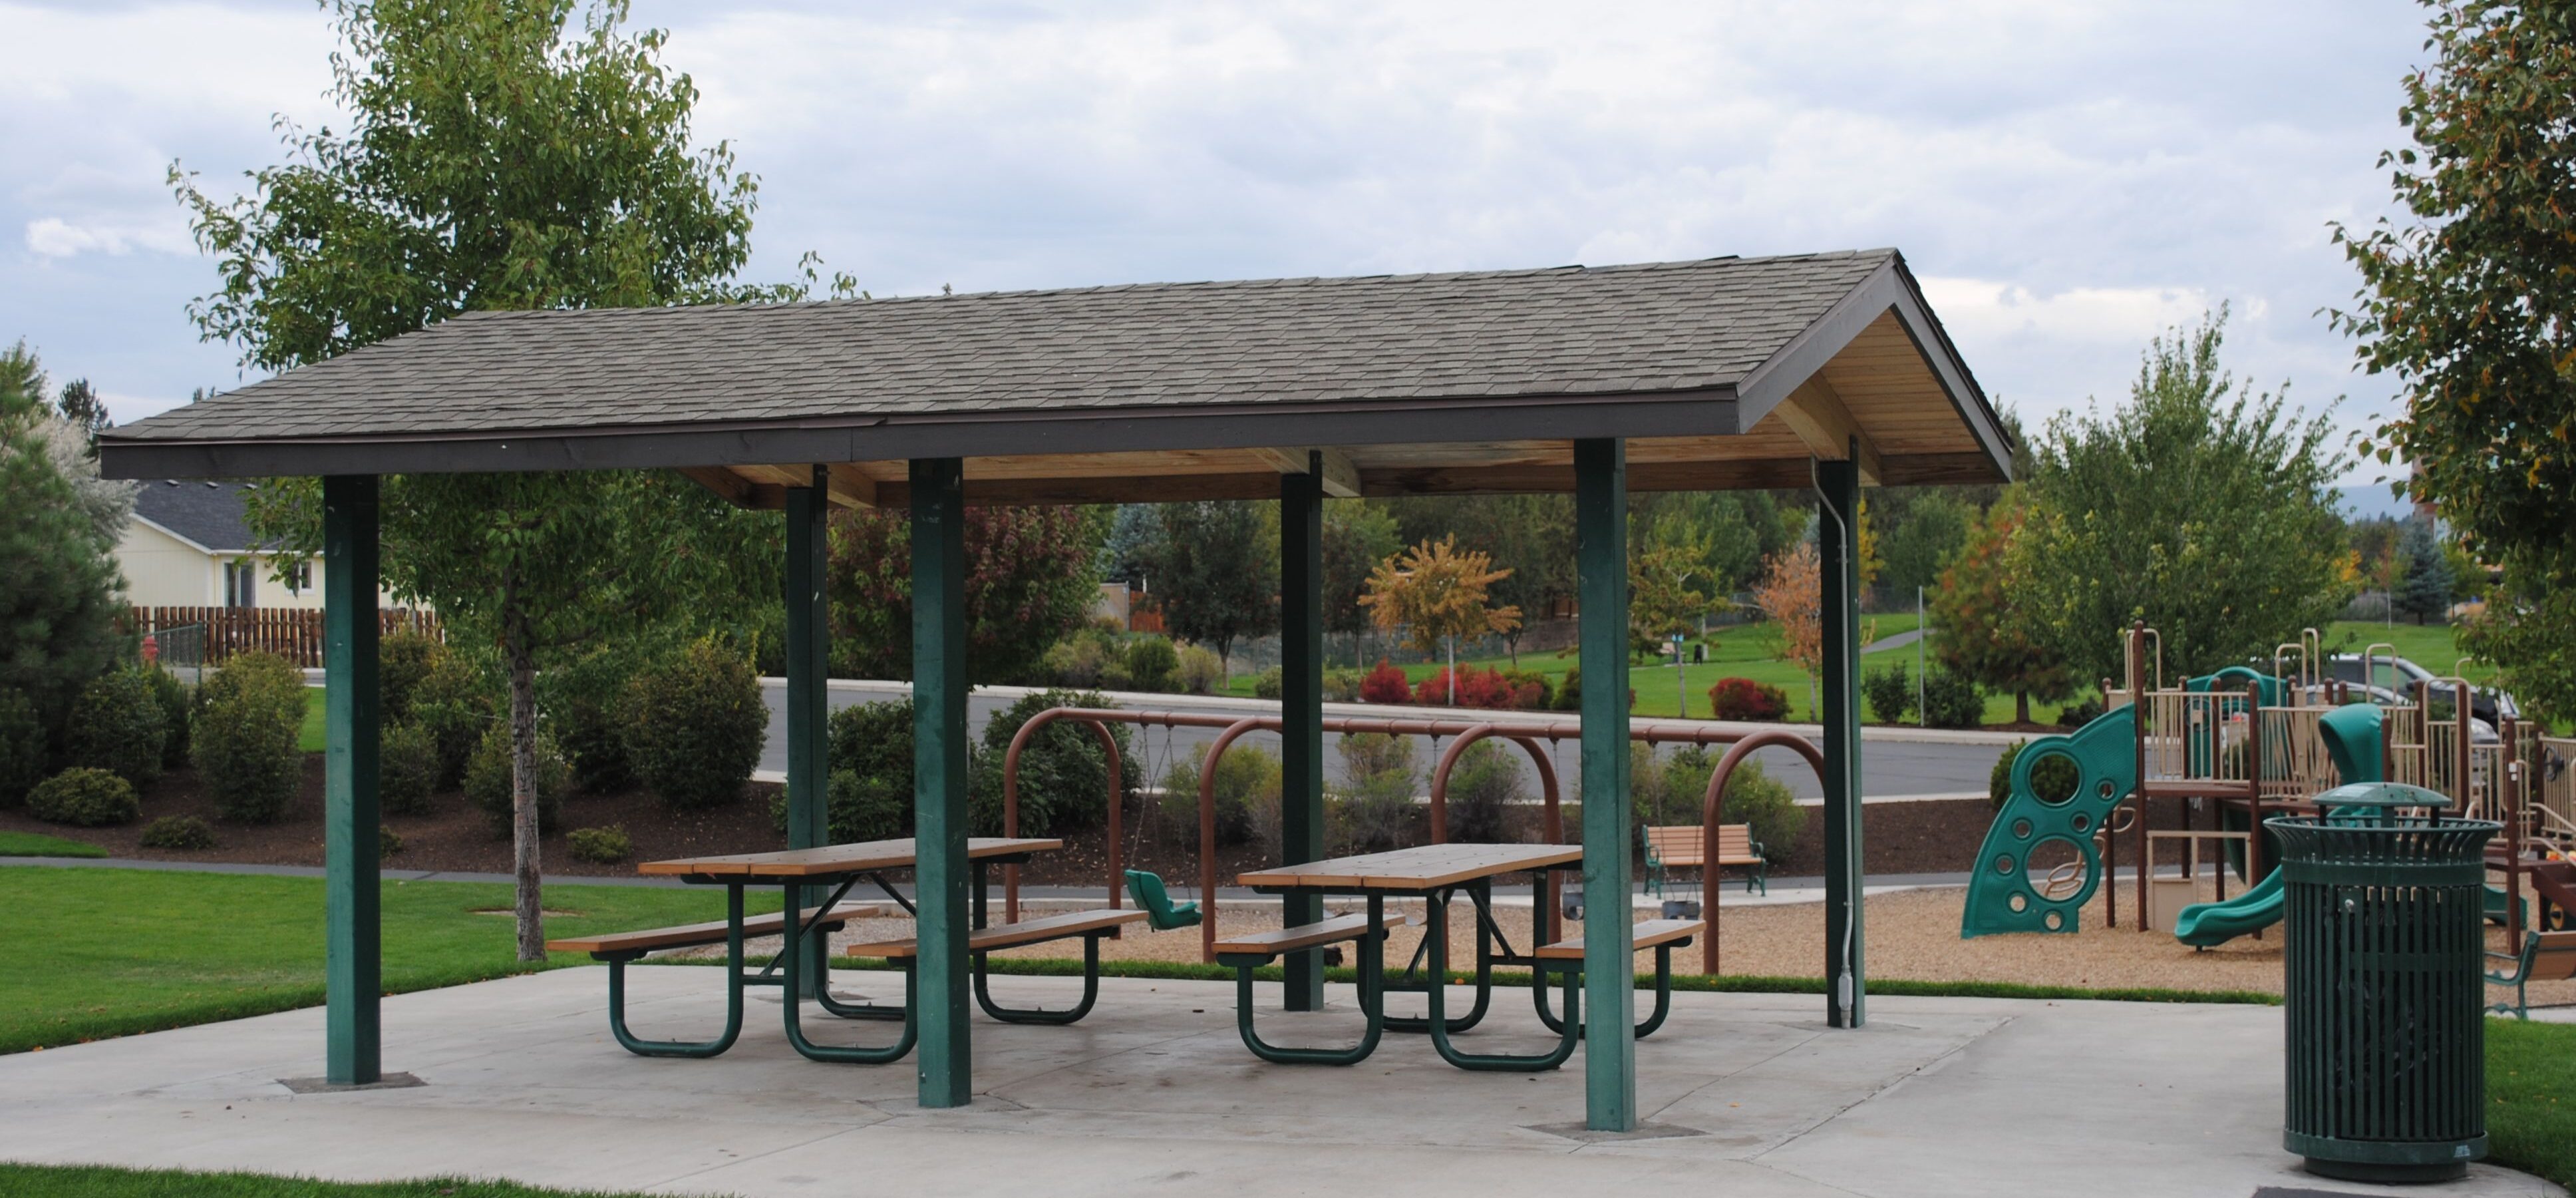 Mountain View Park shelter